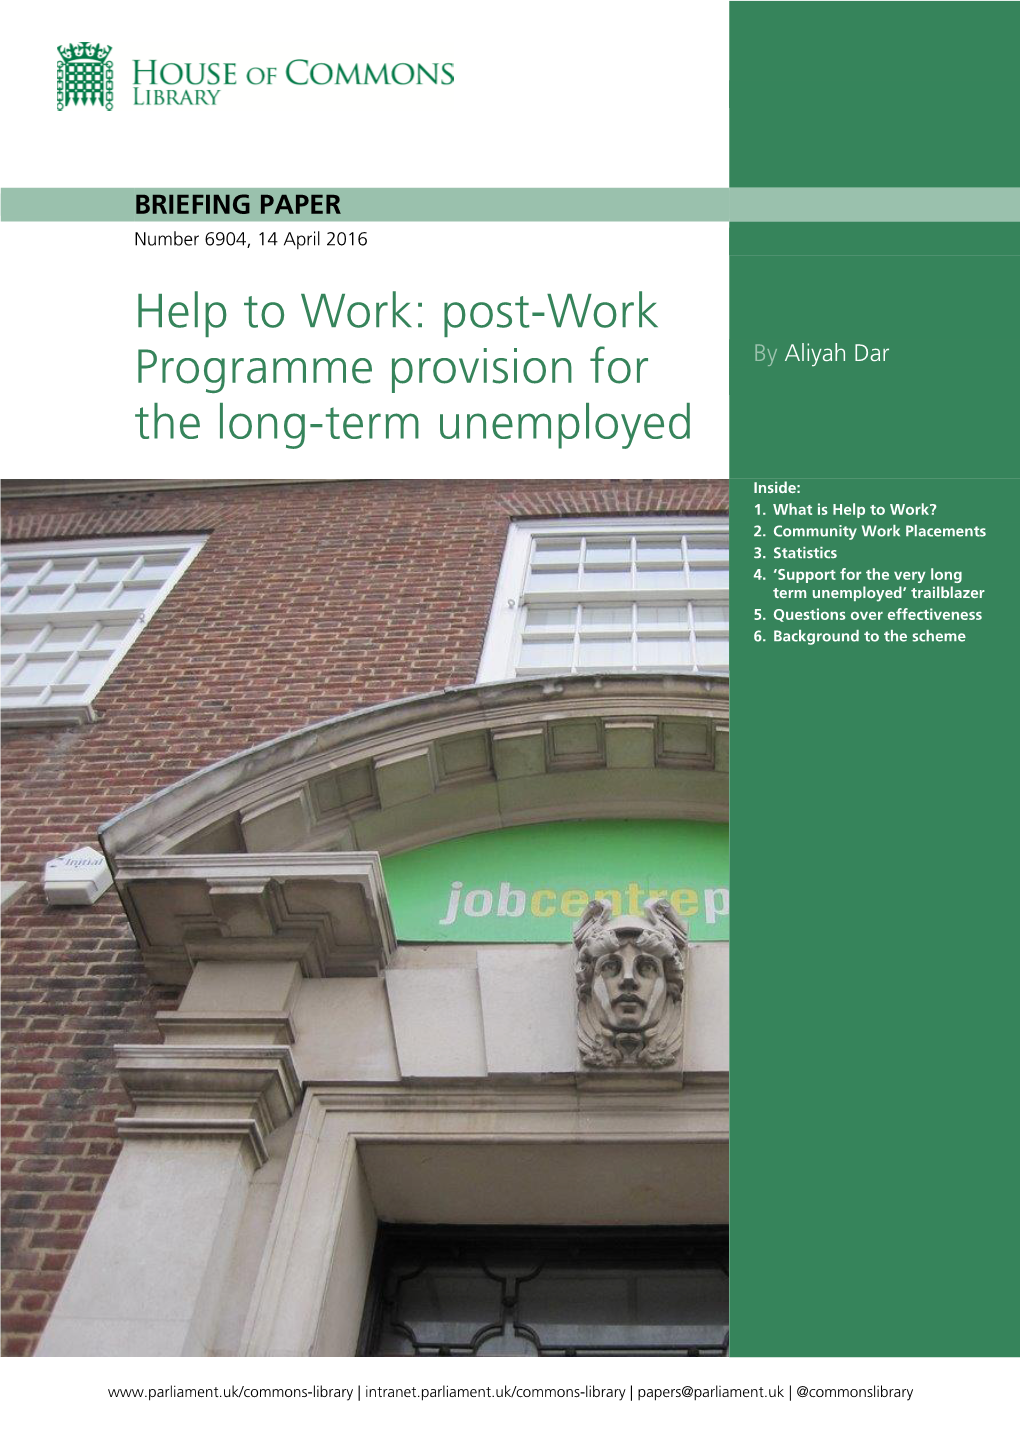 Post-Work Programme Provision for the Long-Term Unemployed